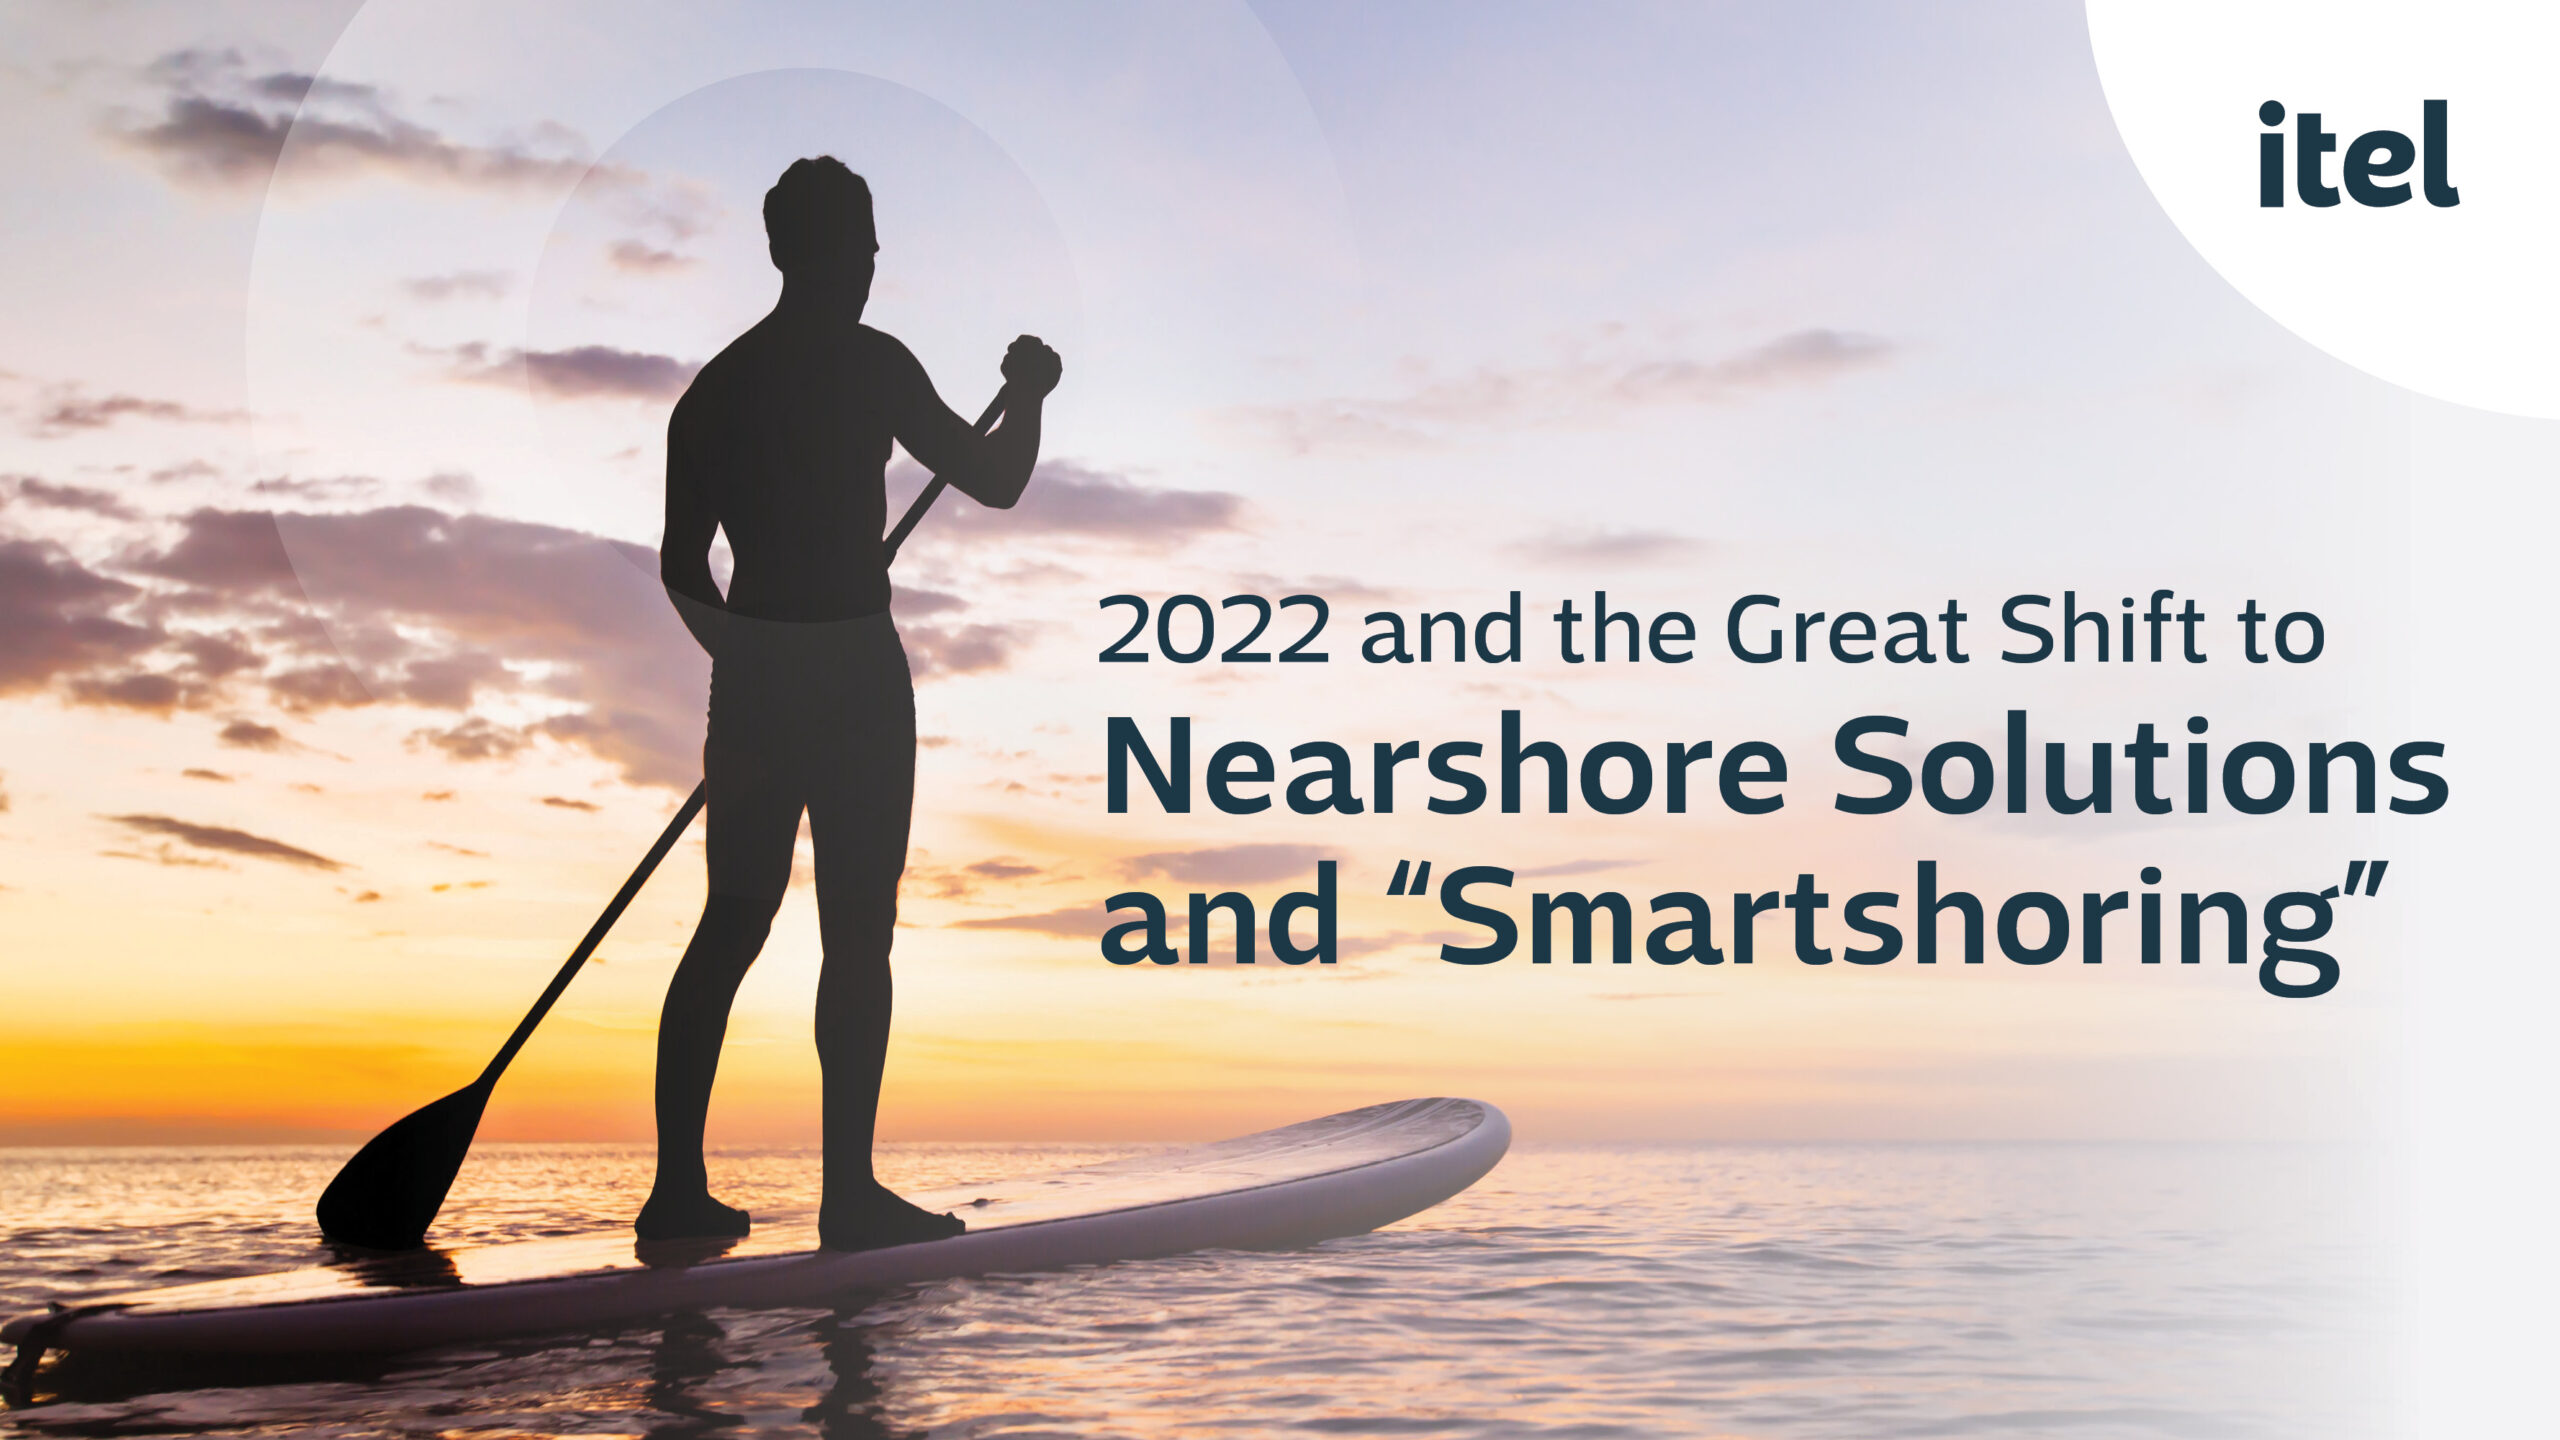 Cover image for itel's 2022 CX Predictions. Image of a man paddle boarding at sunset